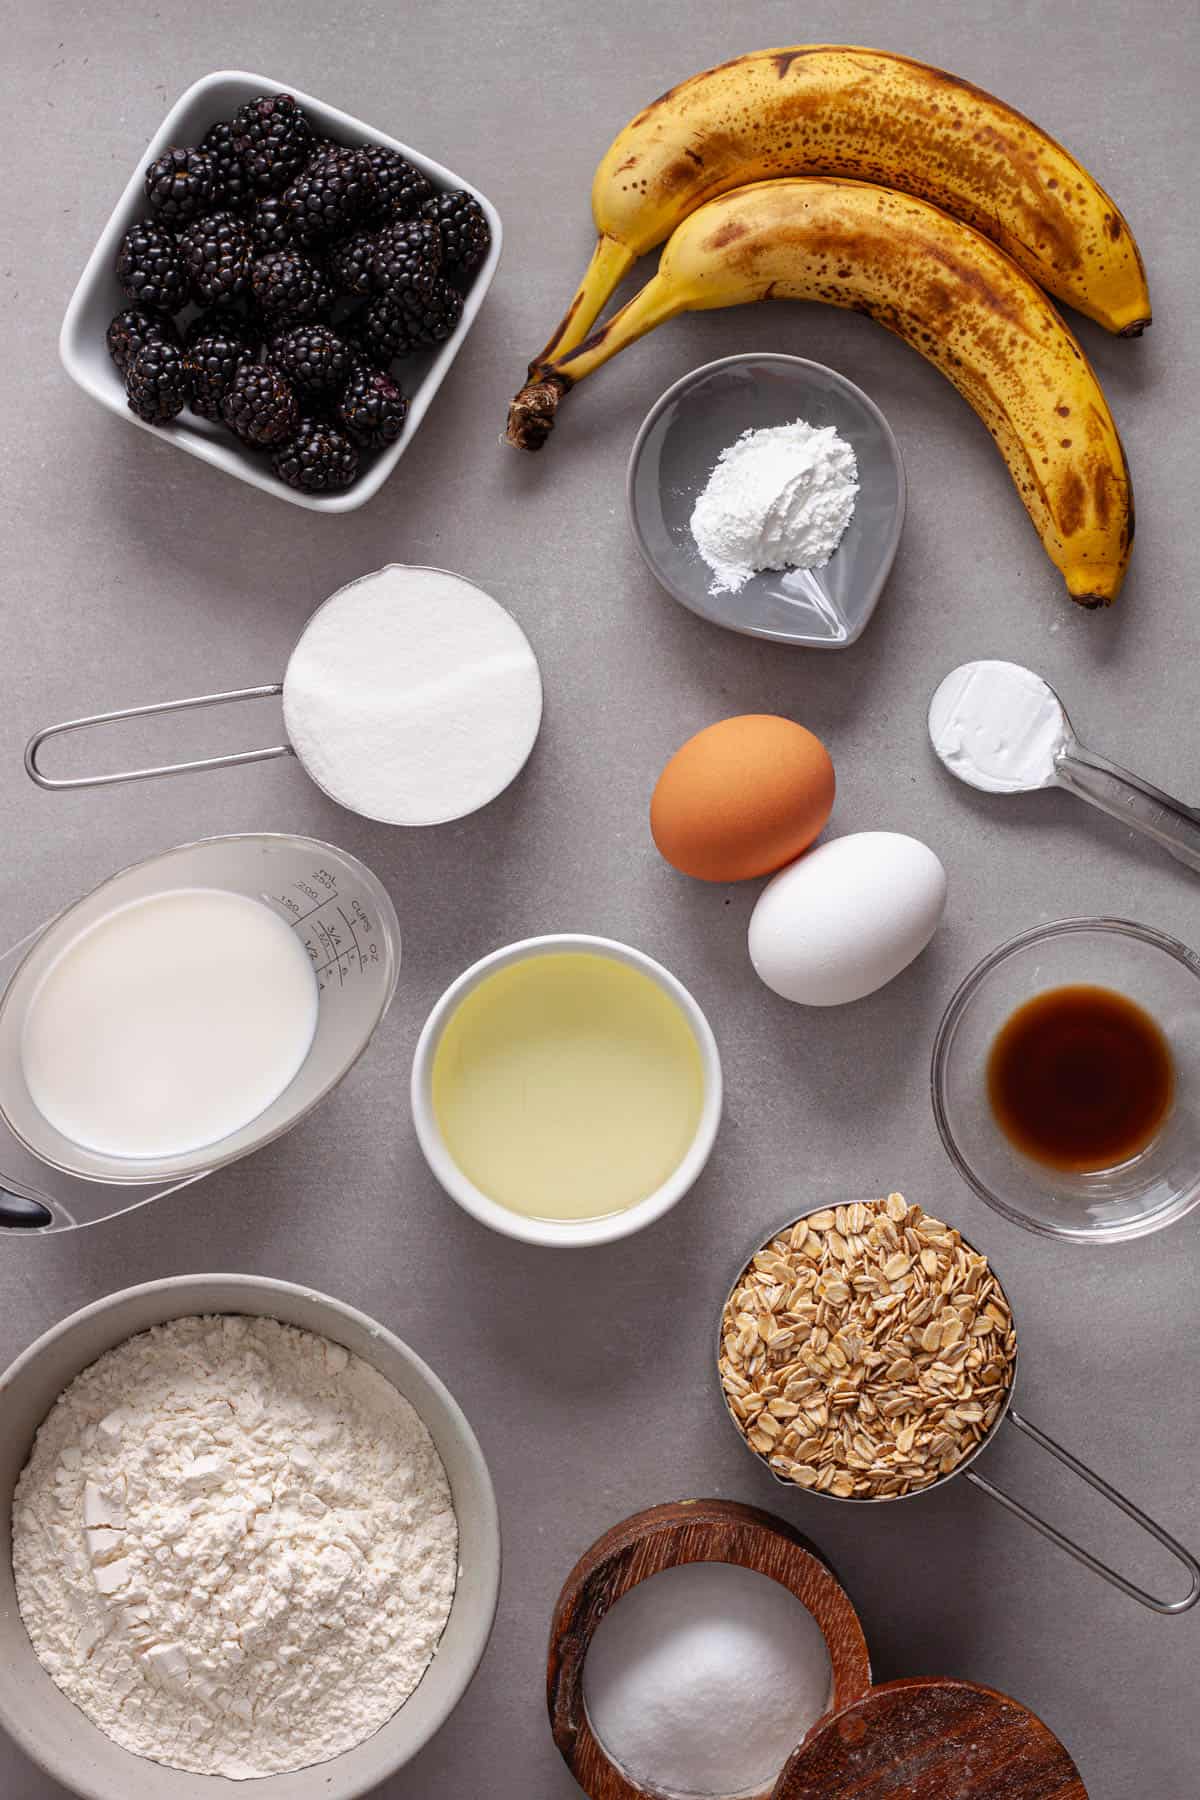 Ingredients for blackberry banana oat muffins on a gray table.